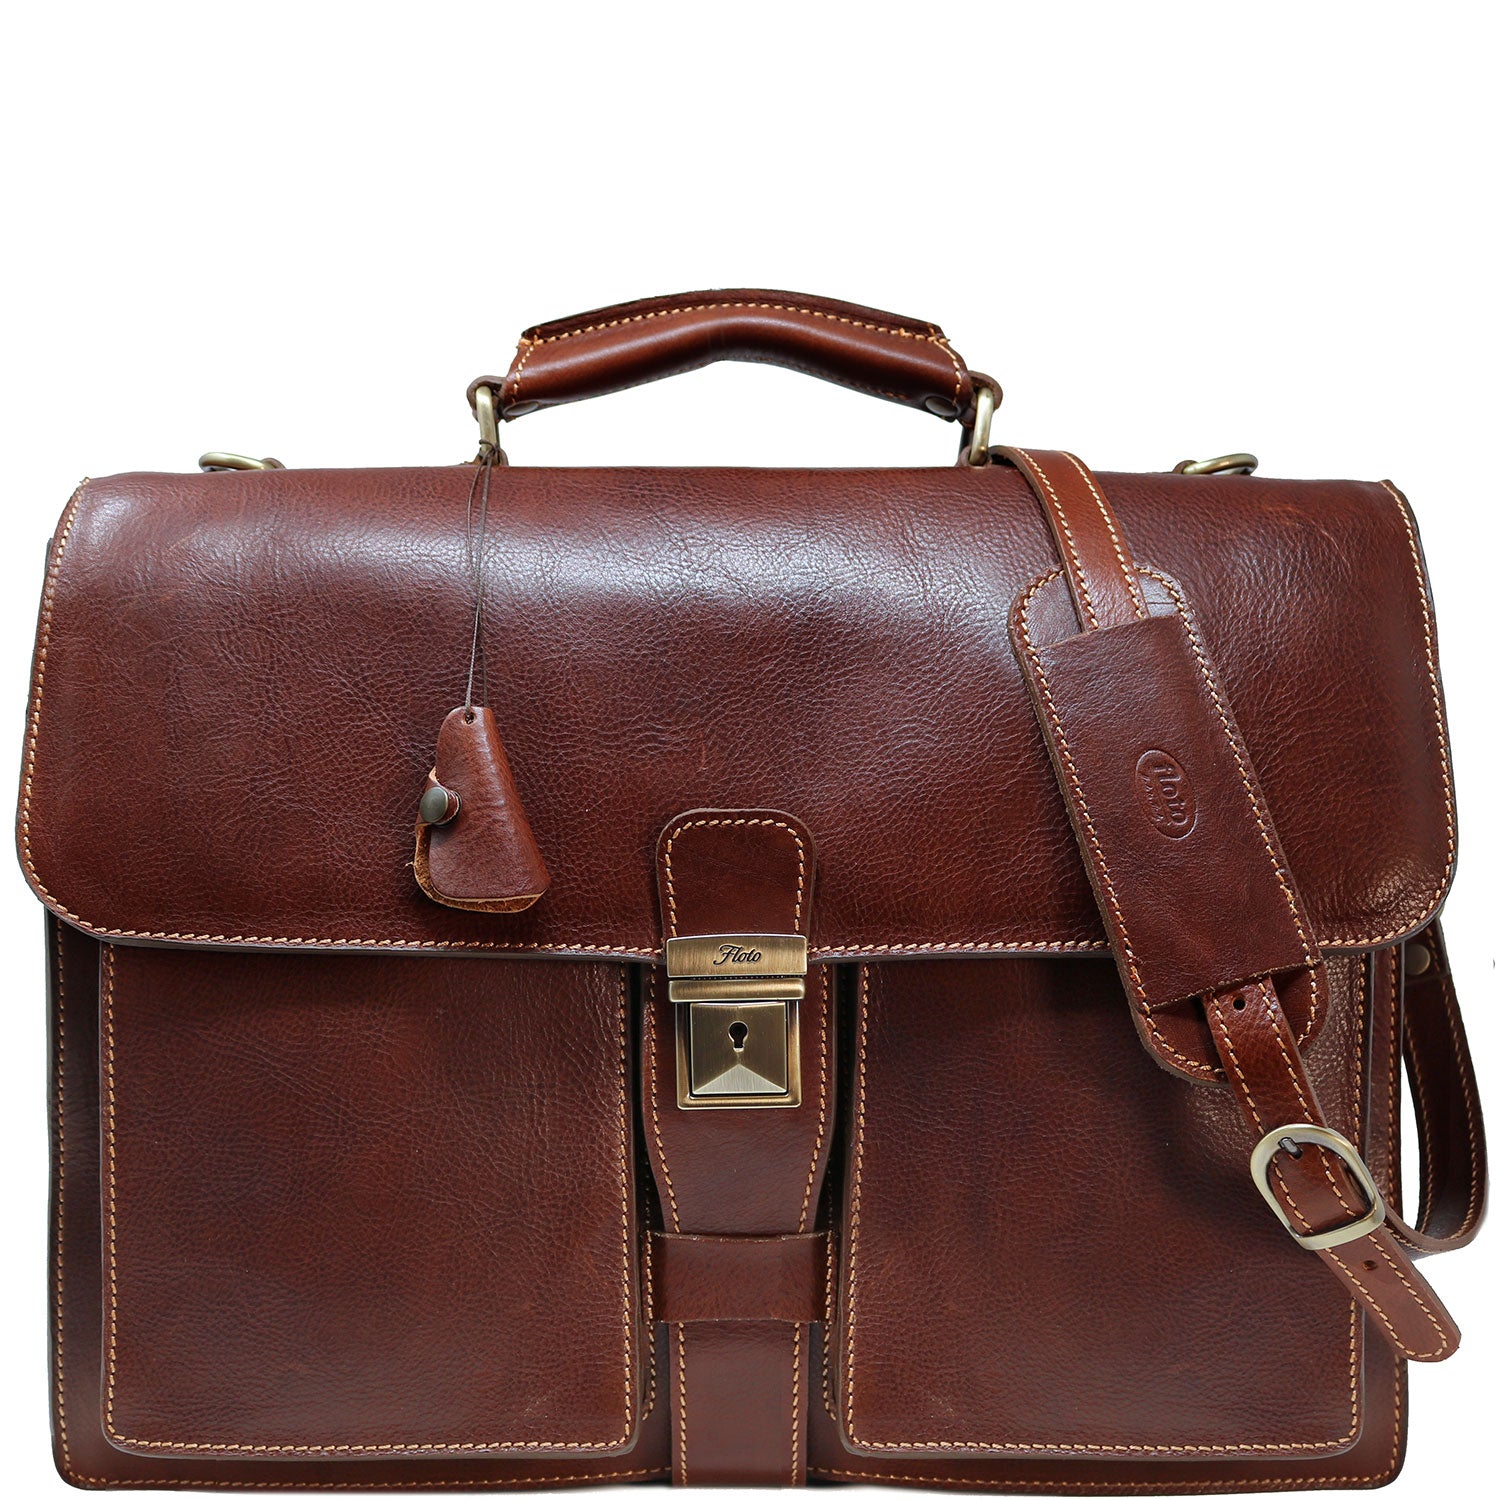 Best Italian Leather Briefcases for Men & Women